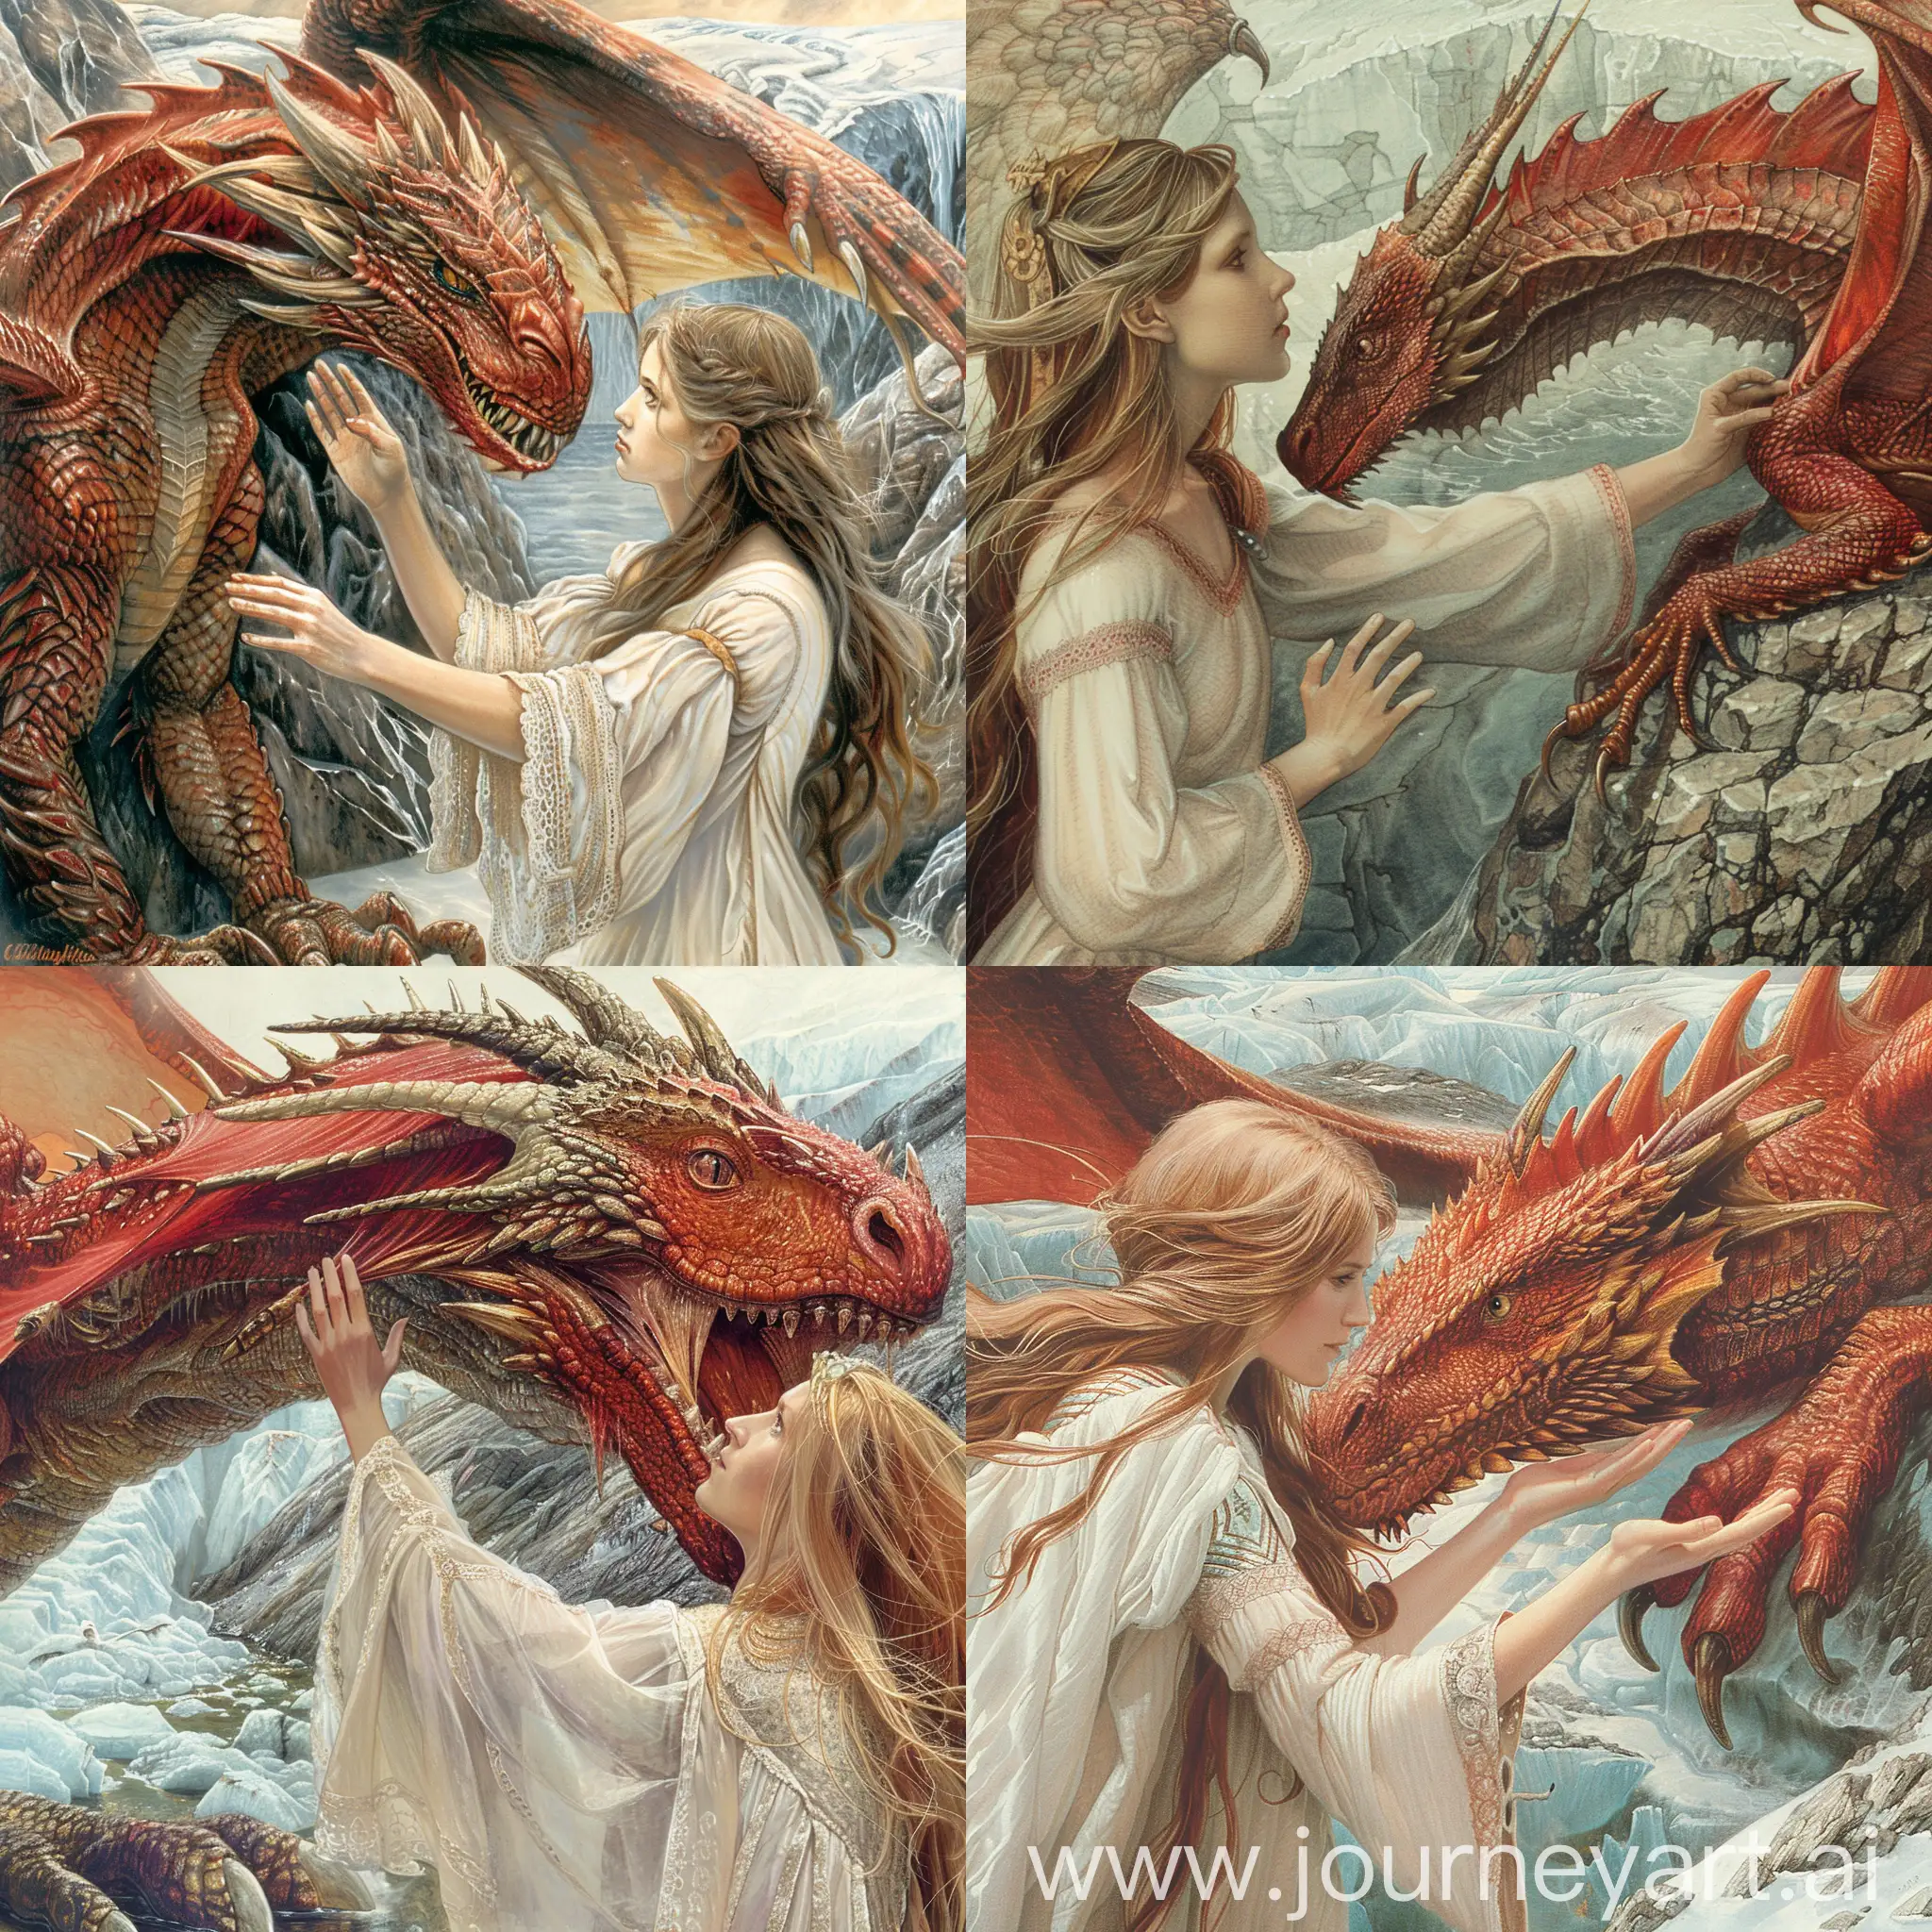 A beautiful medieval angel woman with long flowing hair reaching out to touch the head of a large red dragon. Background is a glacier.  Pre raphelite